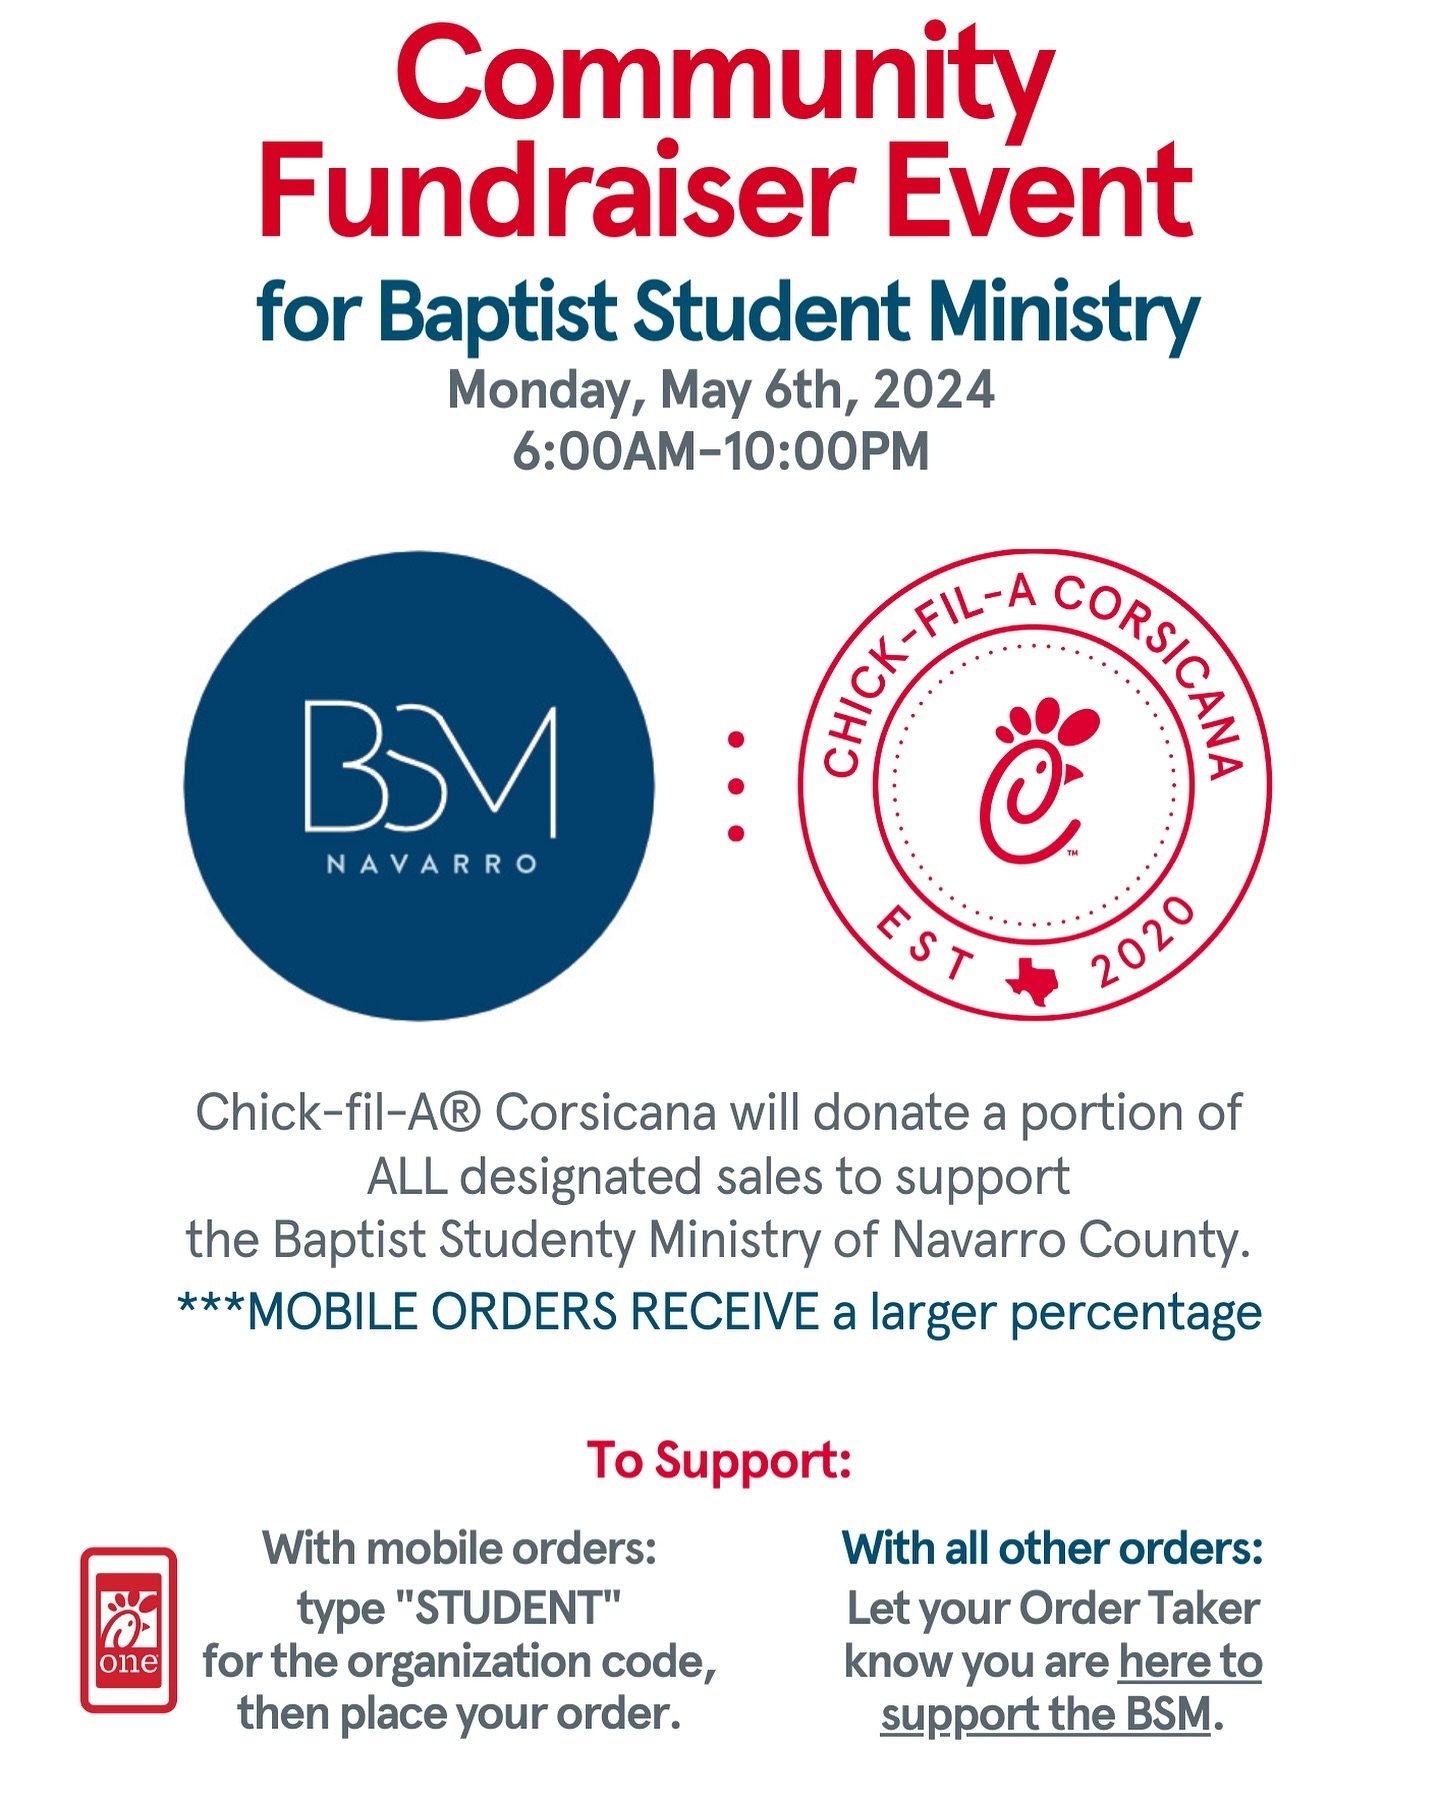 ⏰YOU ARE INVITED: Join us Monday, May 6th for a Community Fundraiser Event supporting Baptist Student Ministries.

💰We will donate a portion of ALL designated orders on this day. 

☑️To ensure your order counts, please follow these instructions:
📲M